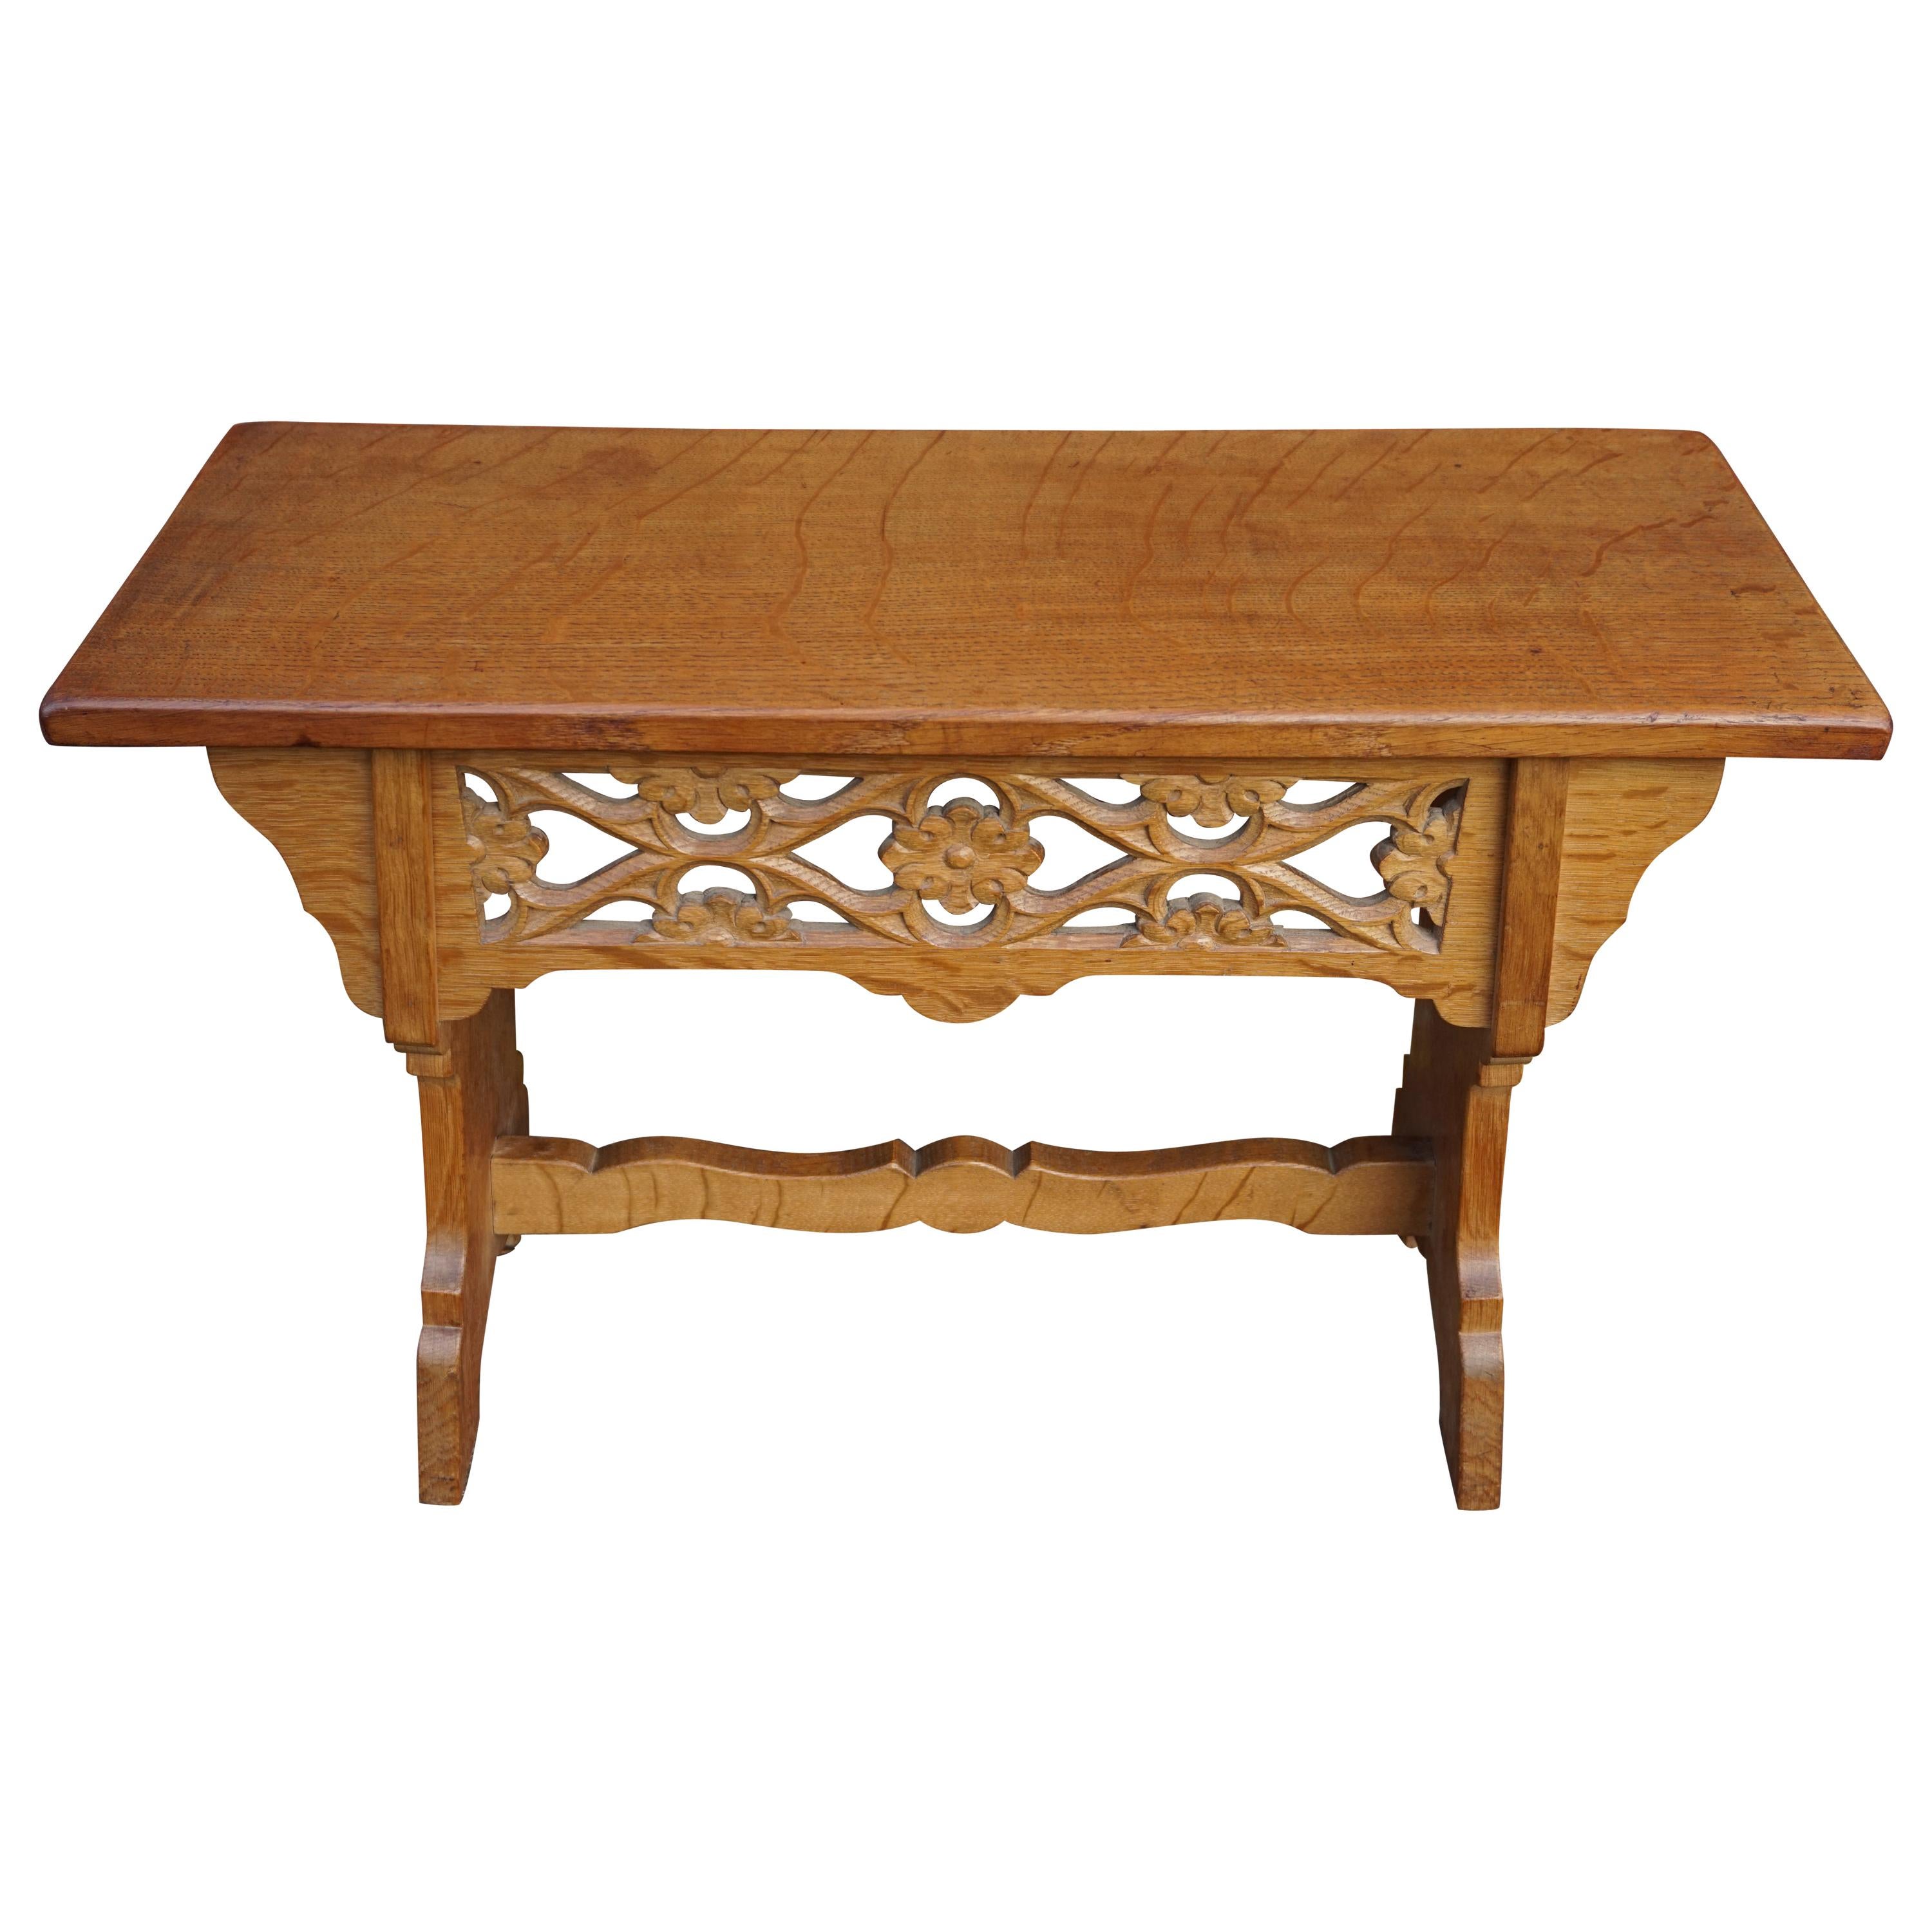 Handcrafted and Hand Carved Gothic Revival Hall Bench or Stool Made of Solid Oak